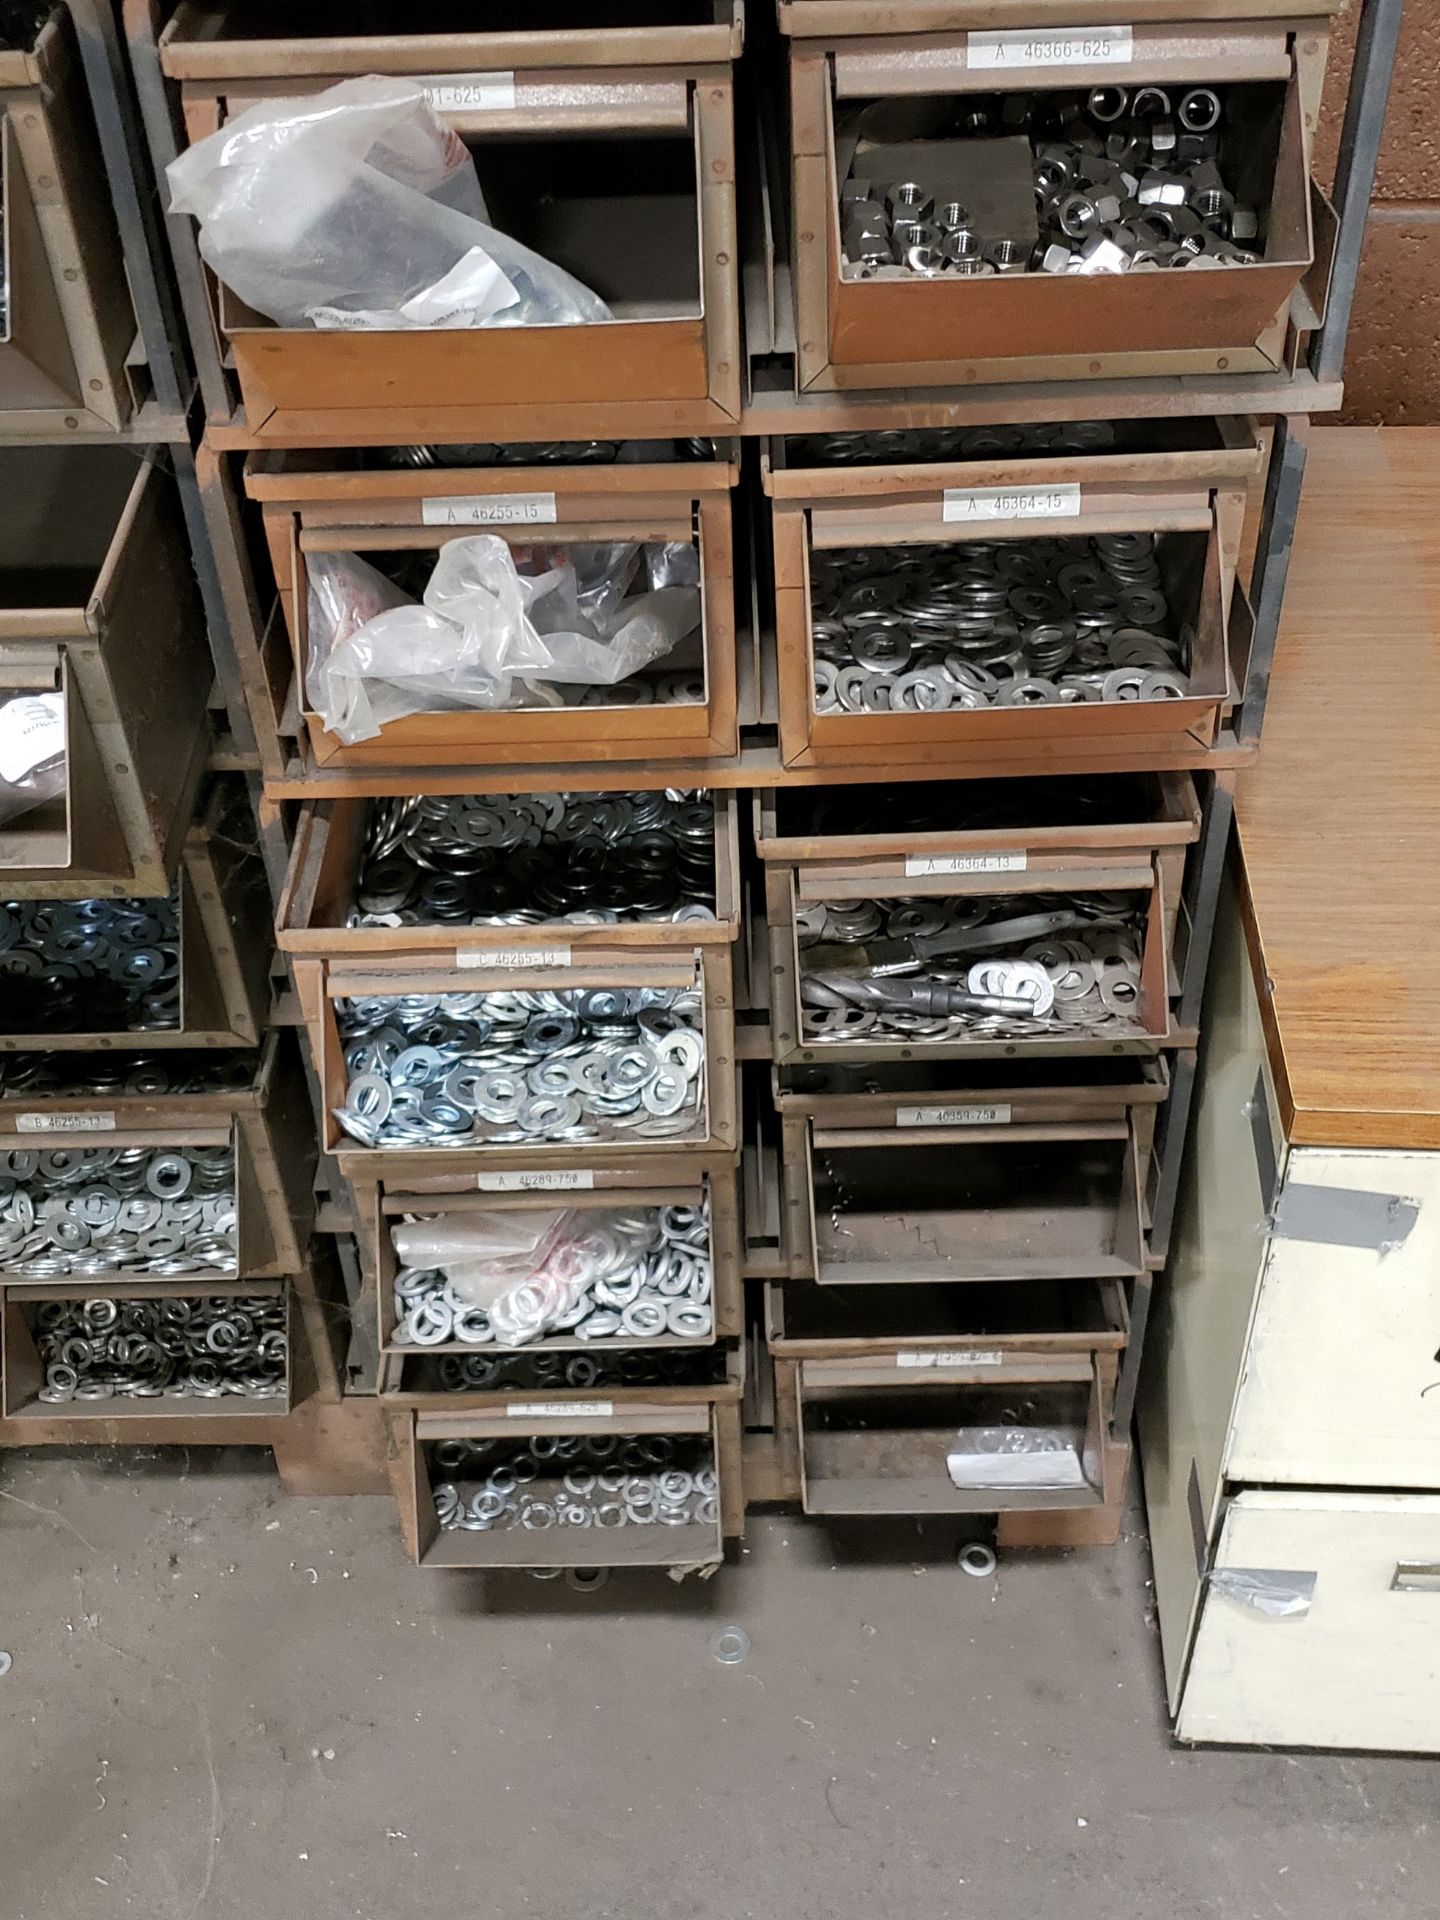 METAL PARTS BINS W/ ASSORTED WASHERS AND NUTS - Image 4 of 4